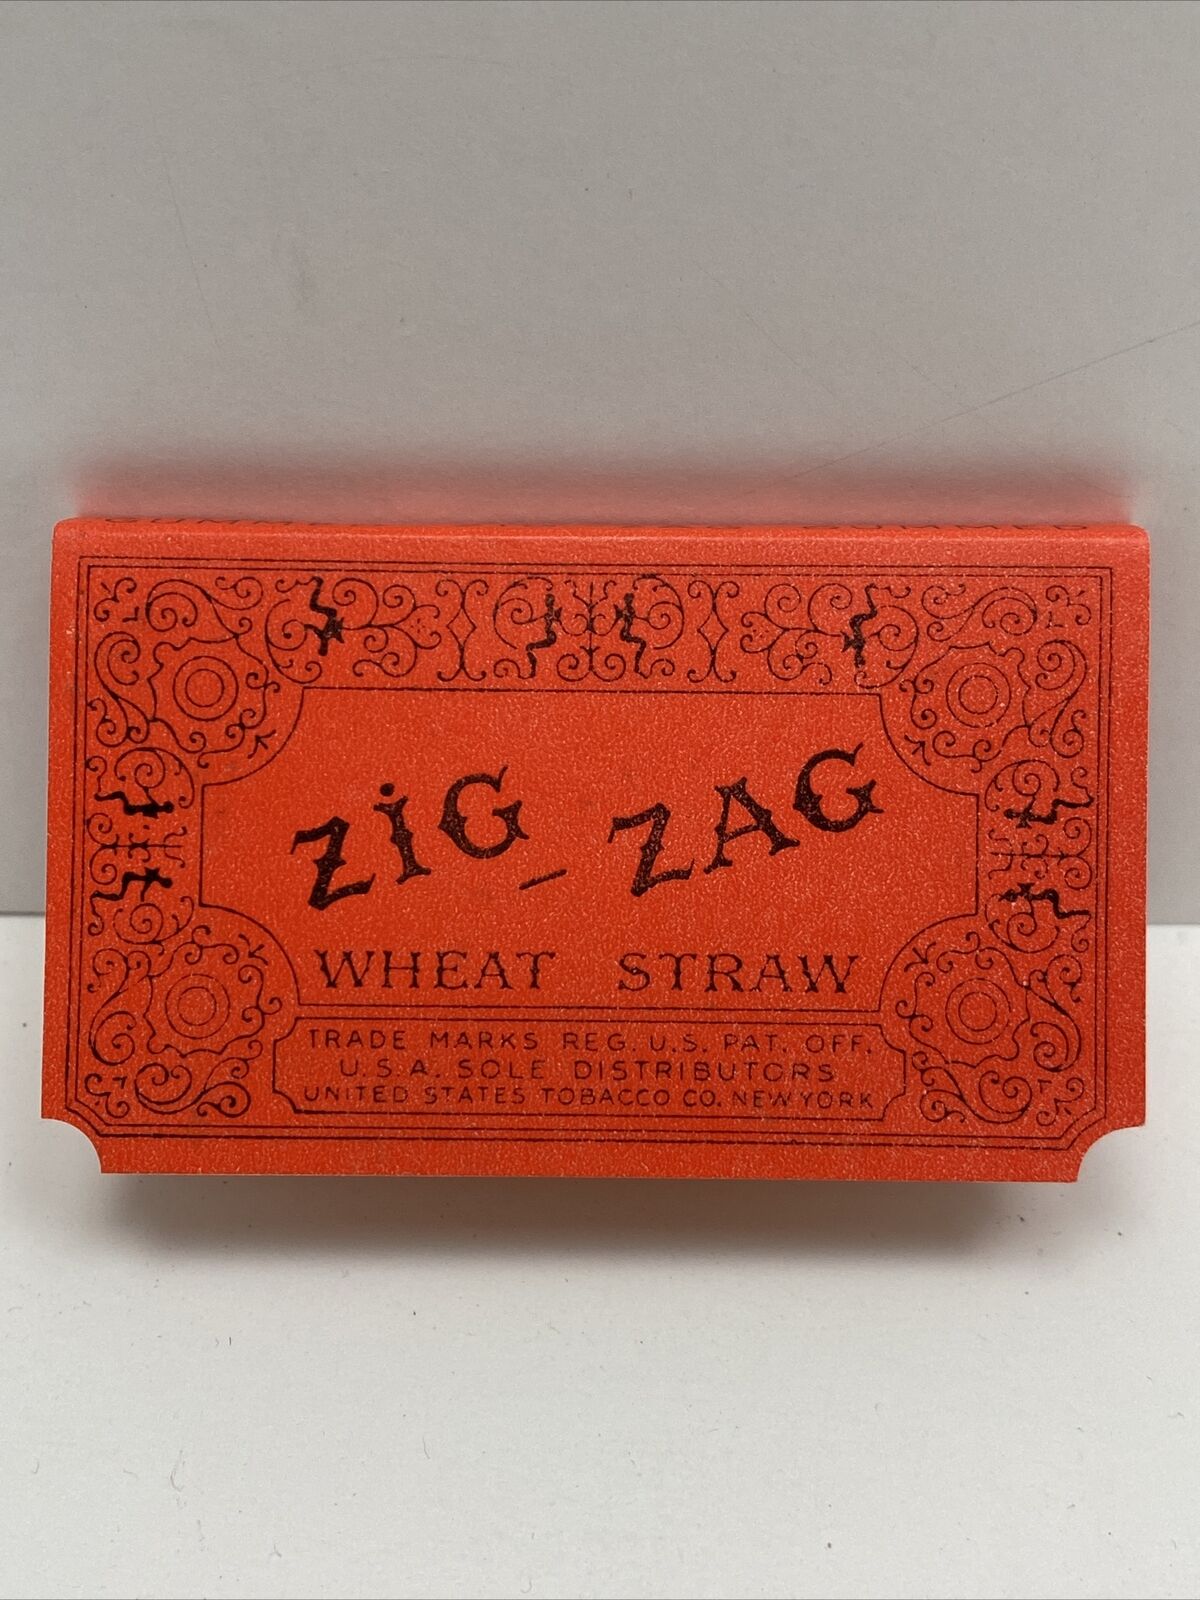 Vintage 1960's Era Zig-Zag Wheat Straw Gummed Rolling Papers Red Pack